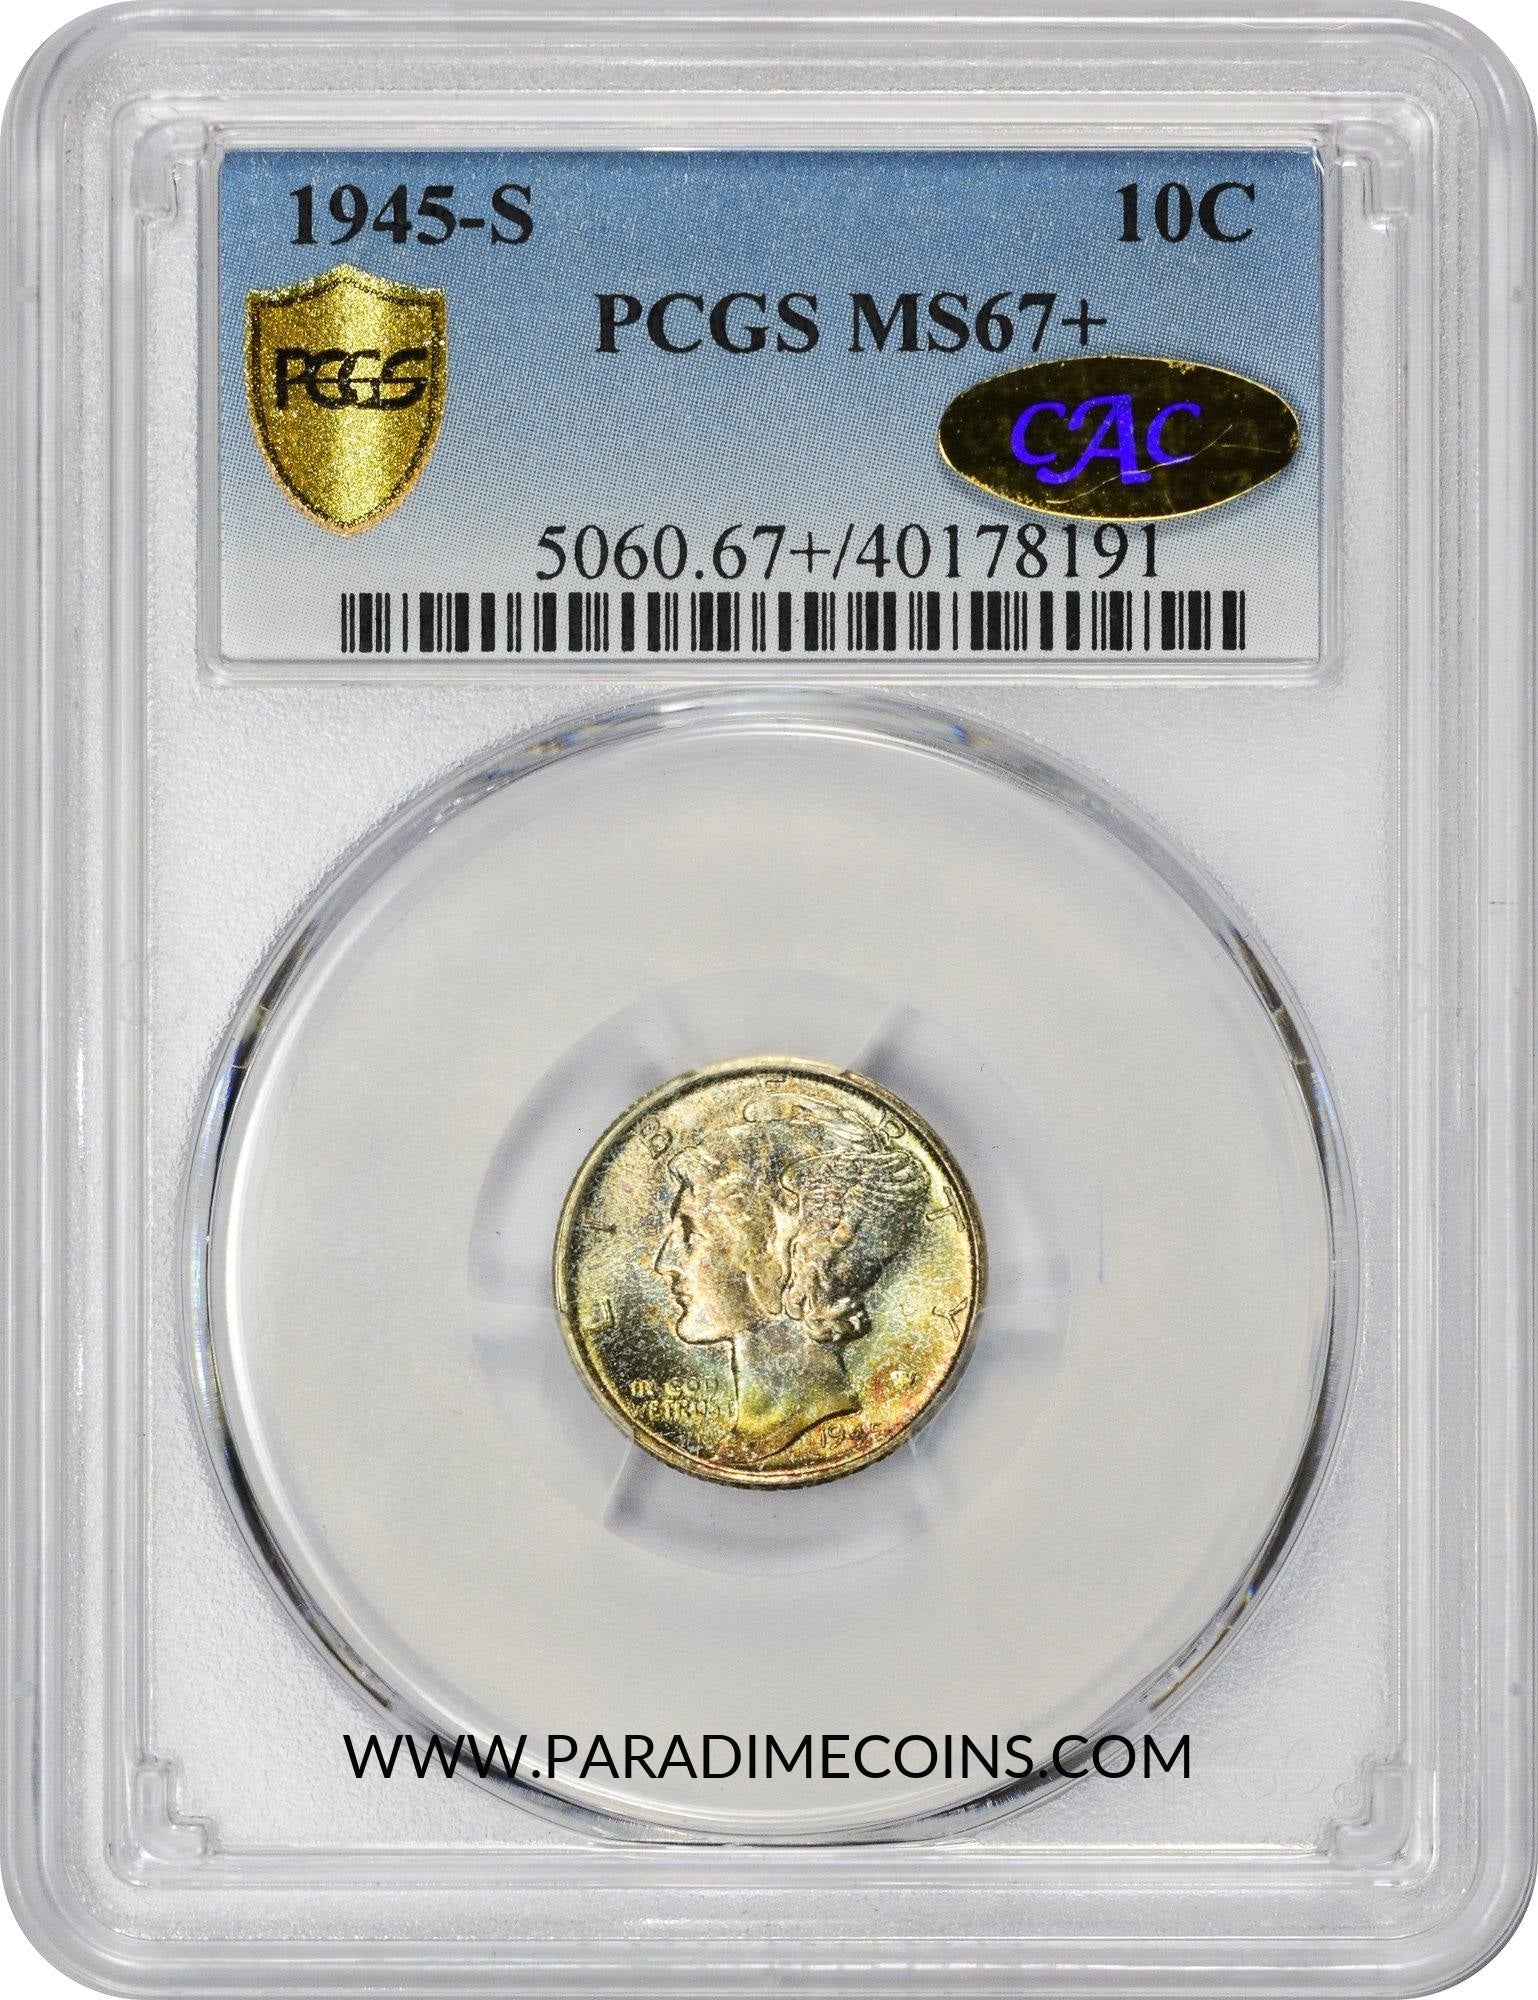 1945-S 10C MS67+ PCGS GOLD CAC - Paradime Coins | PCGS NGC CACG CAC Rare US Numismatic Coins For Sale